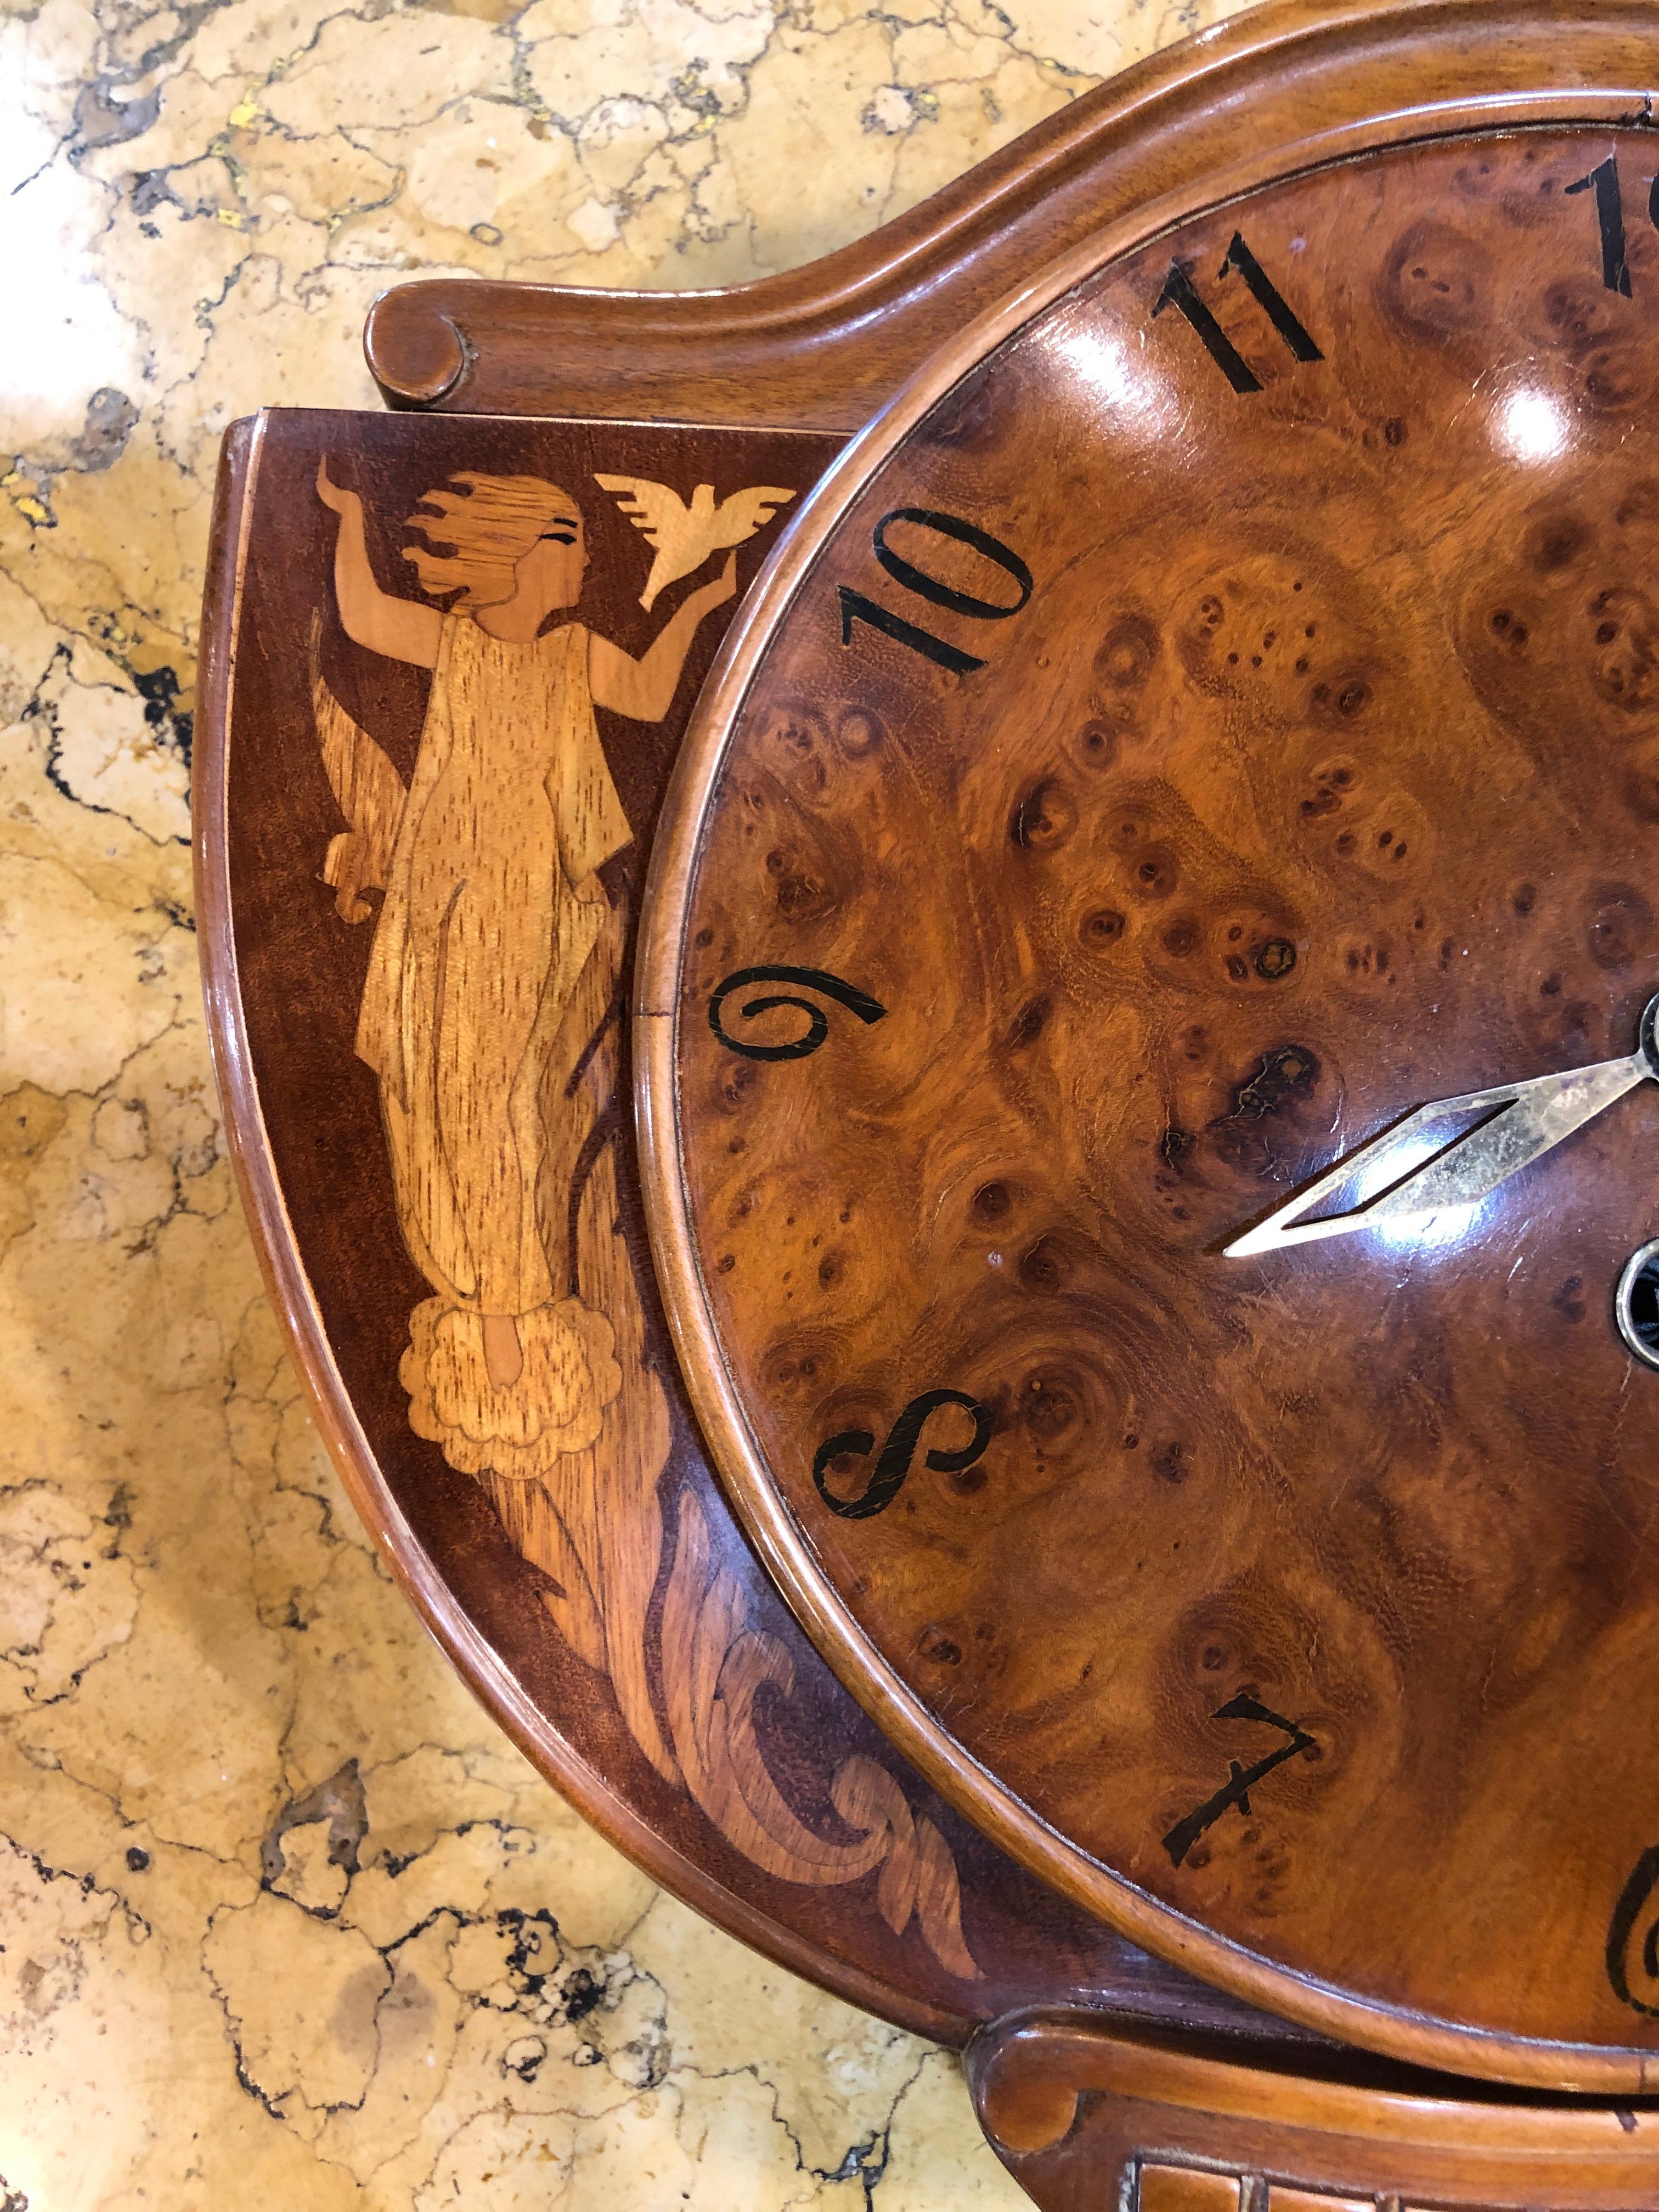 Wall clock from Sweden, the Deco period, circa 1940s, in exceptional functional aesthetic conditions.
In walnut and walnut briar, it presents boxwood inlays with floral motifs and also representing two female figures. The mechanism works and the